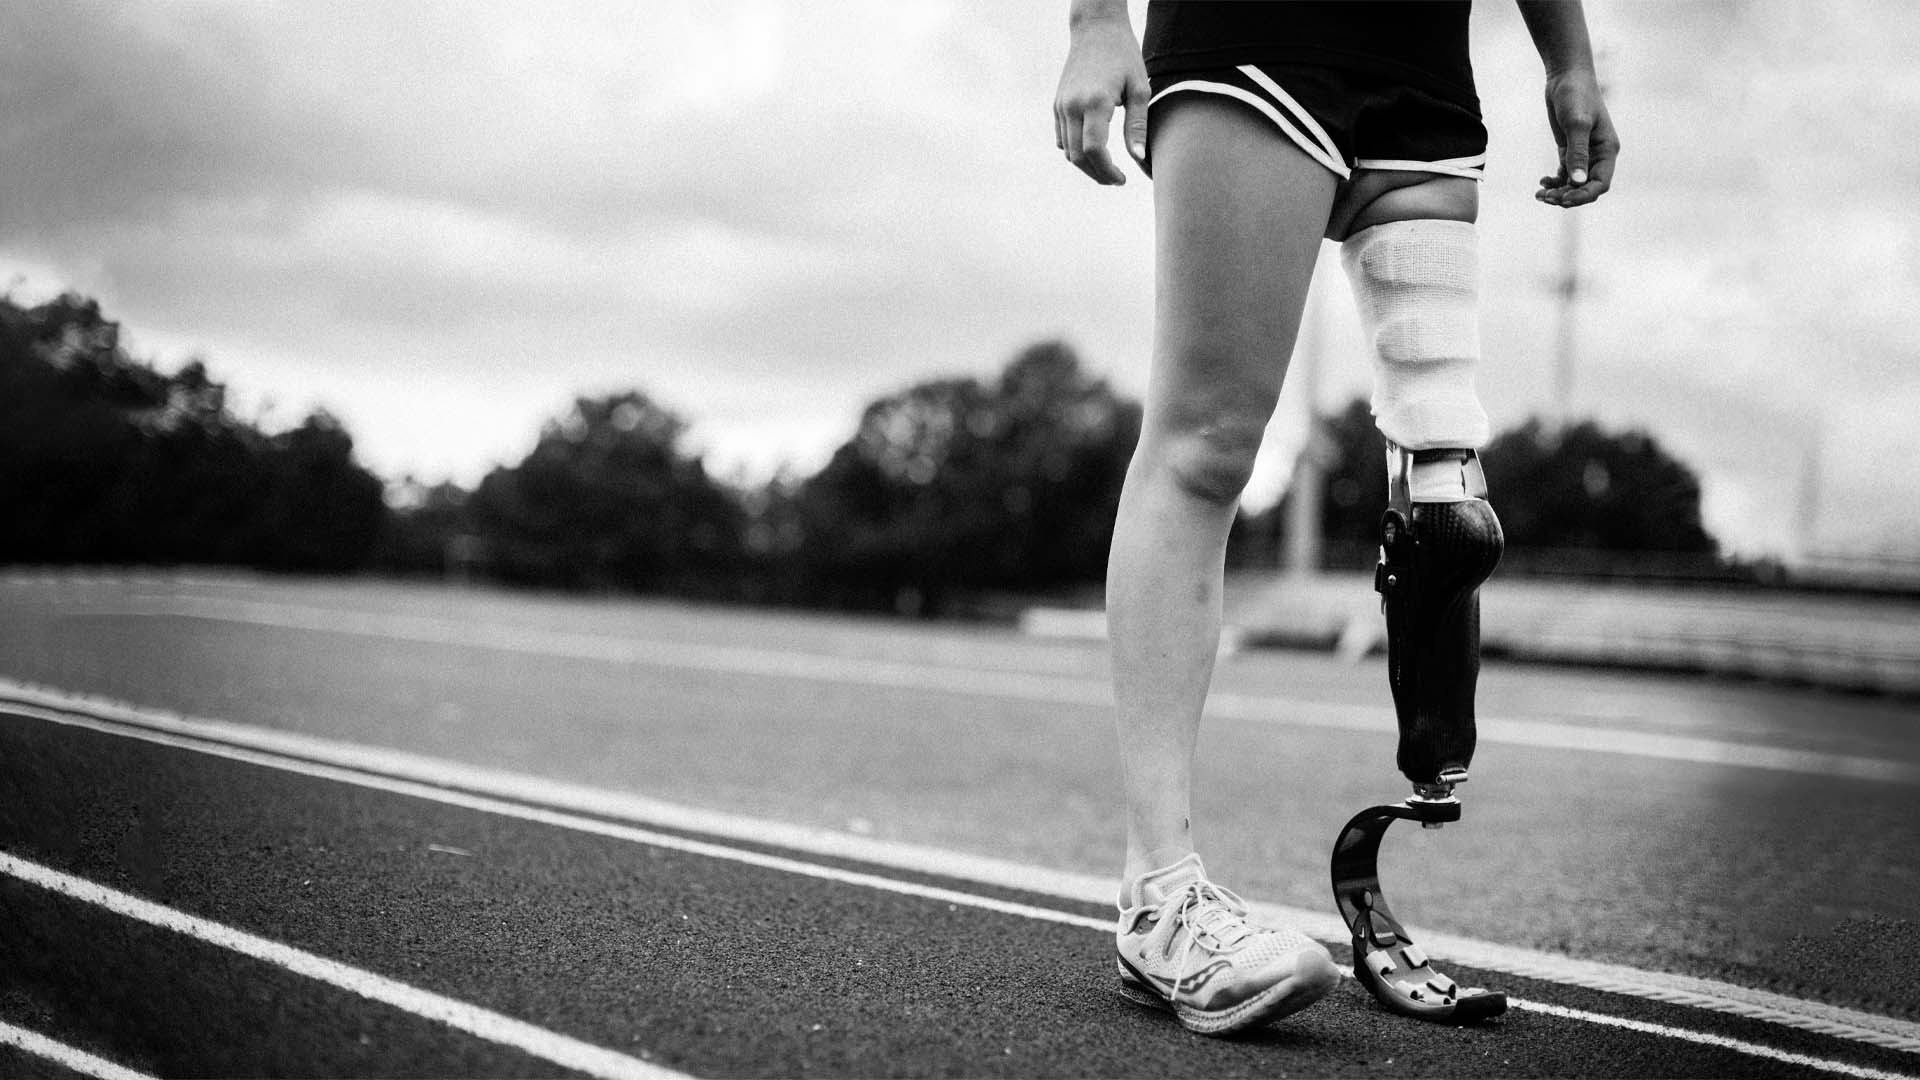 black and white photo of a runner with a prosthetic leg